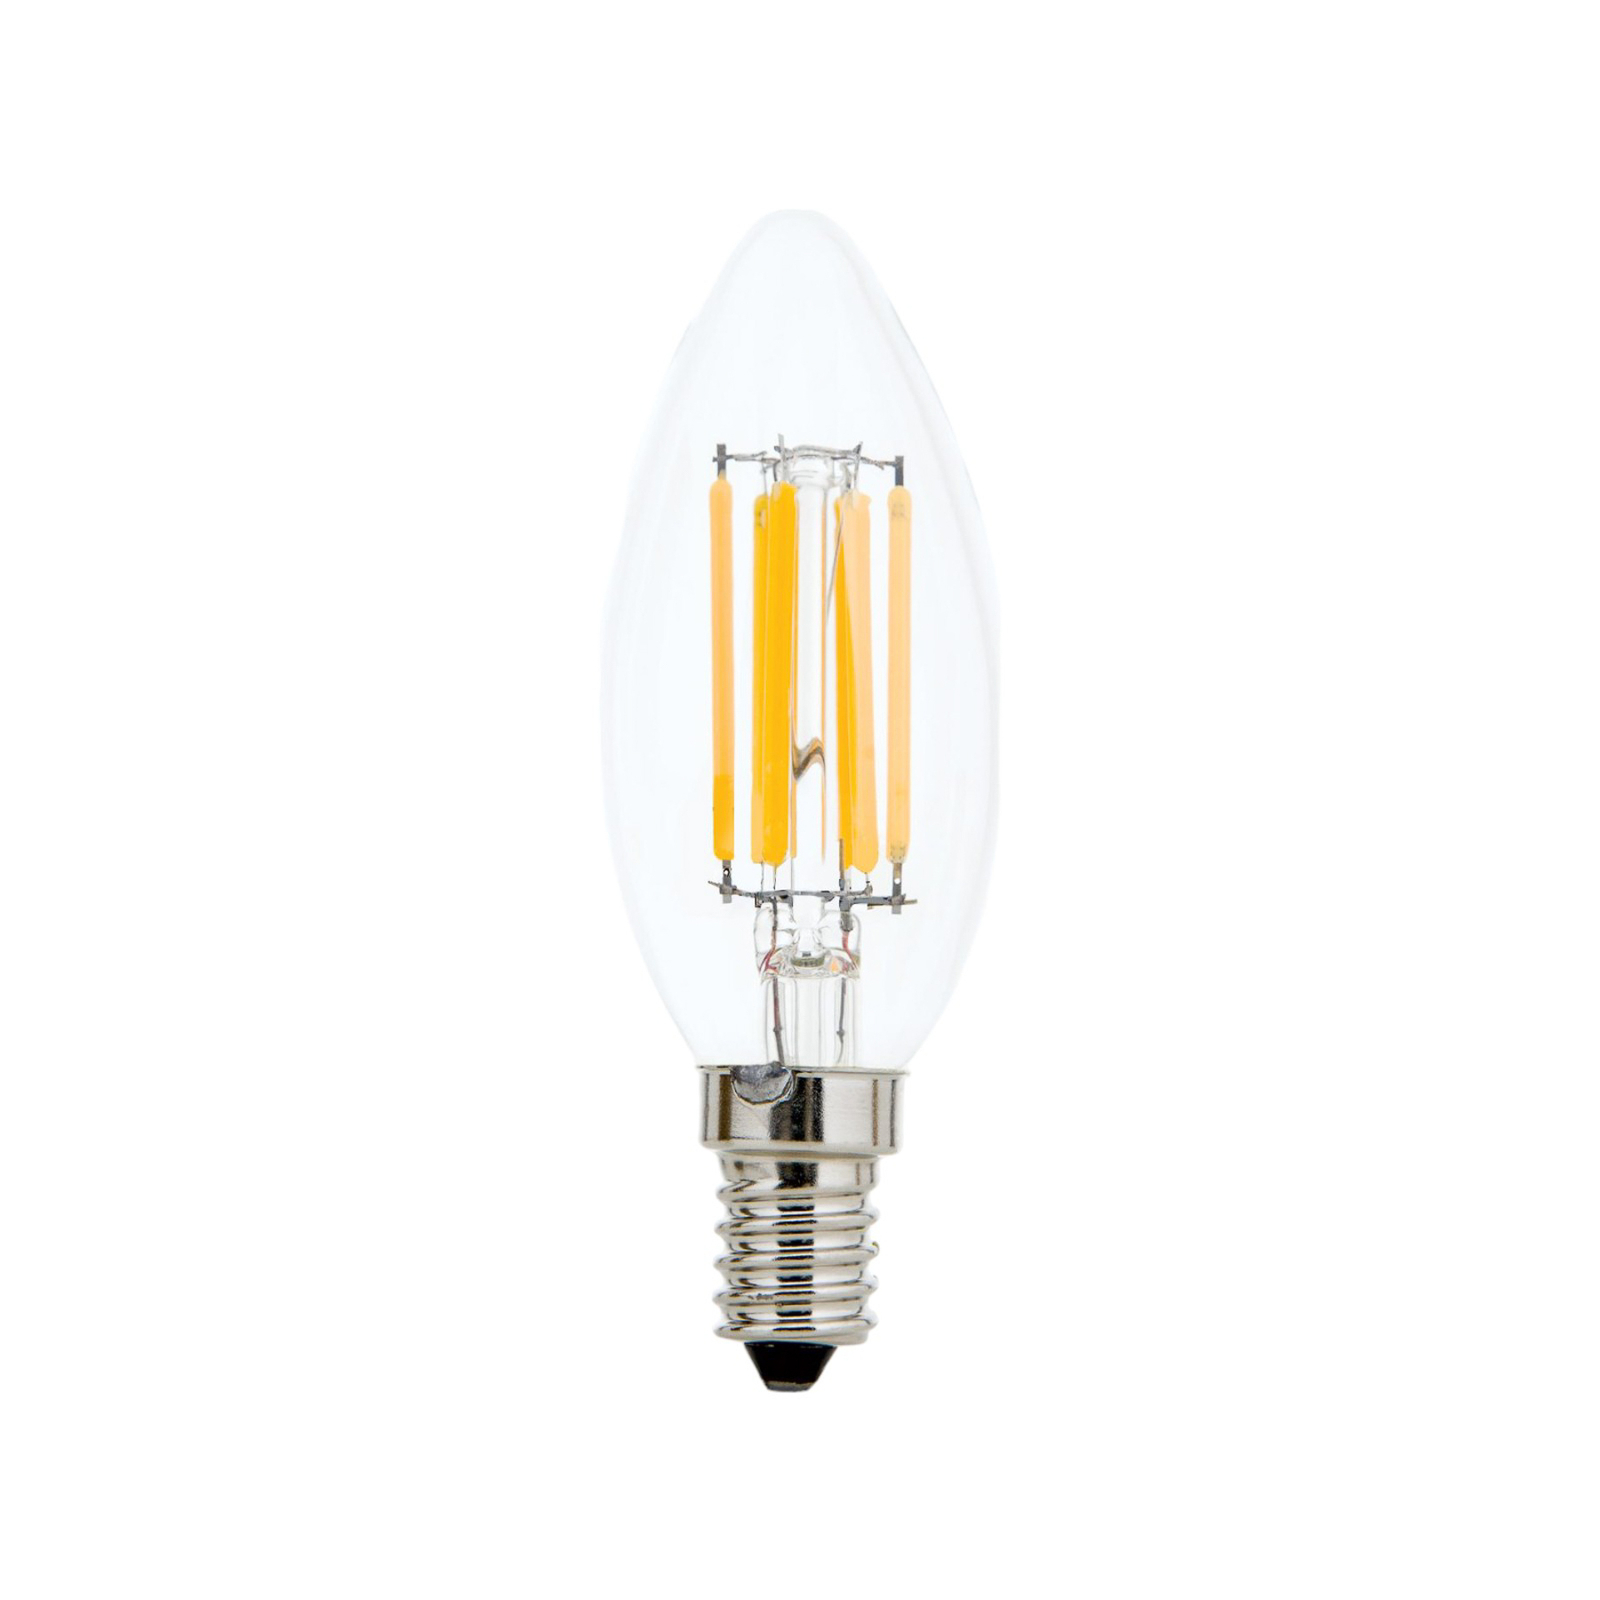 LED bulb Filament E14 C35 clear 6W 827 720lm dimmable